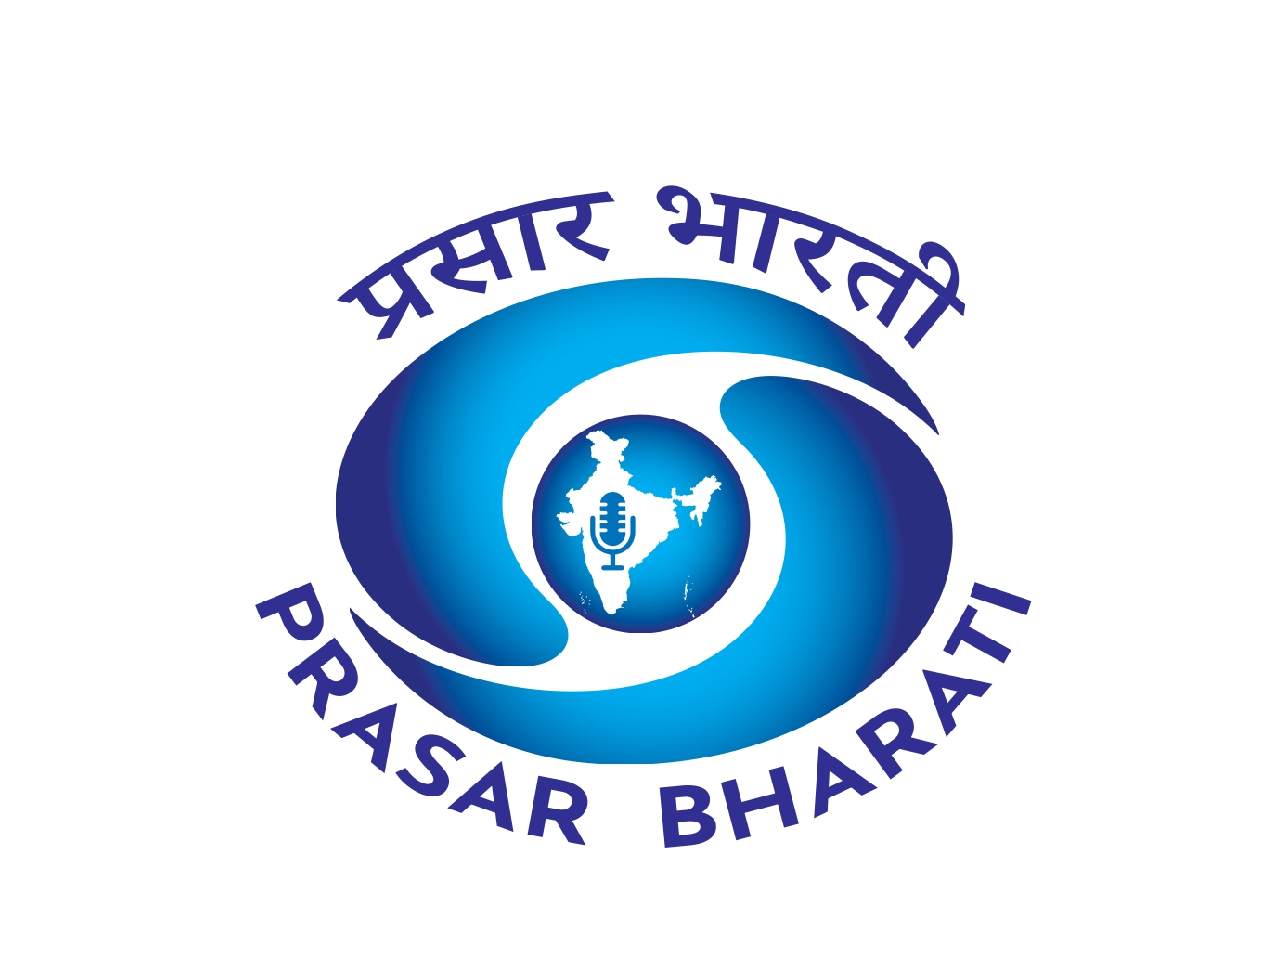 I&B Ministry unveils New Logo of Prasar Bharati on its Silver Jubilee